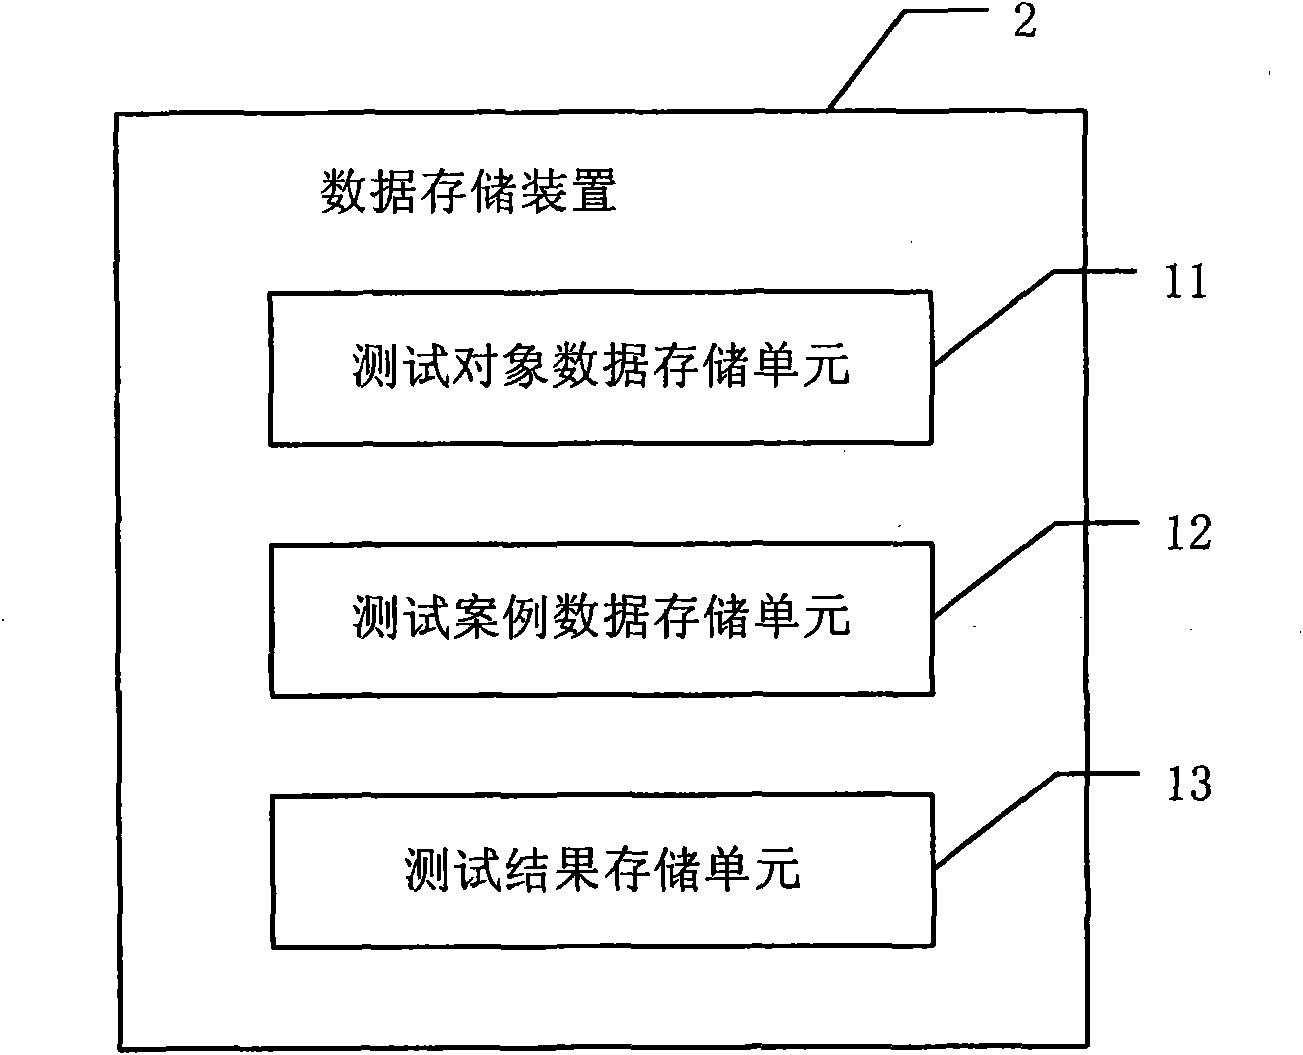 Device and method for automatically testing web page